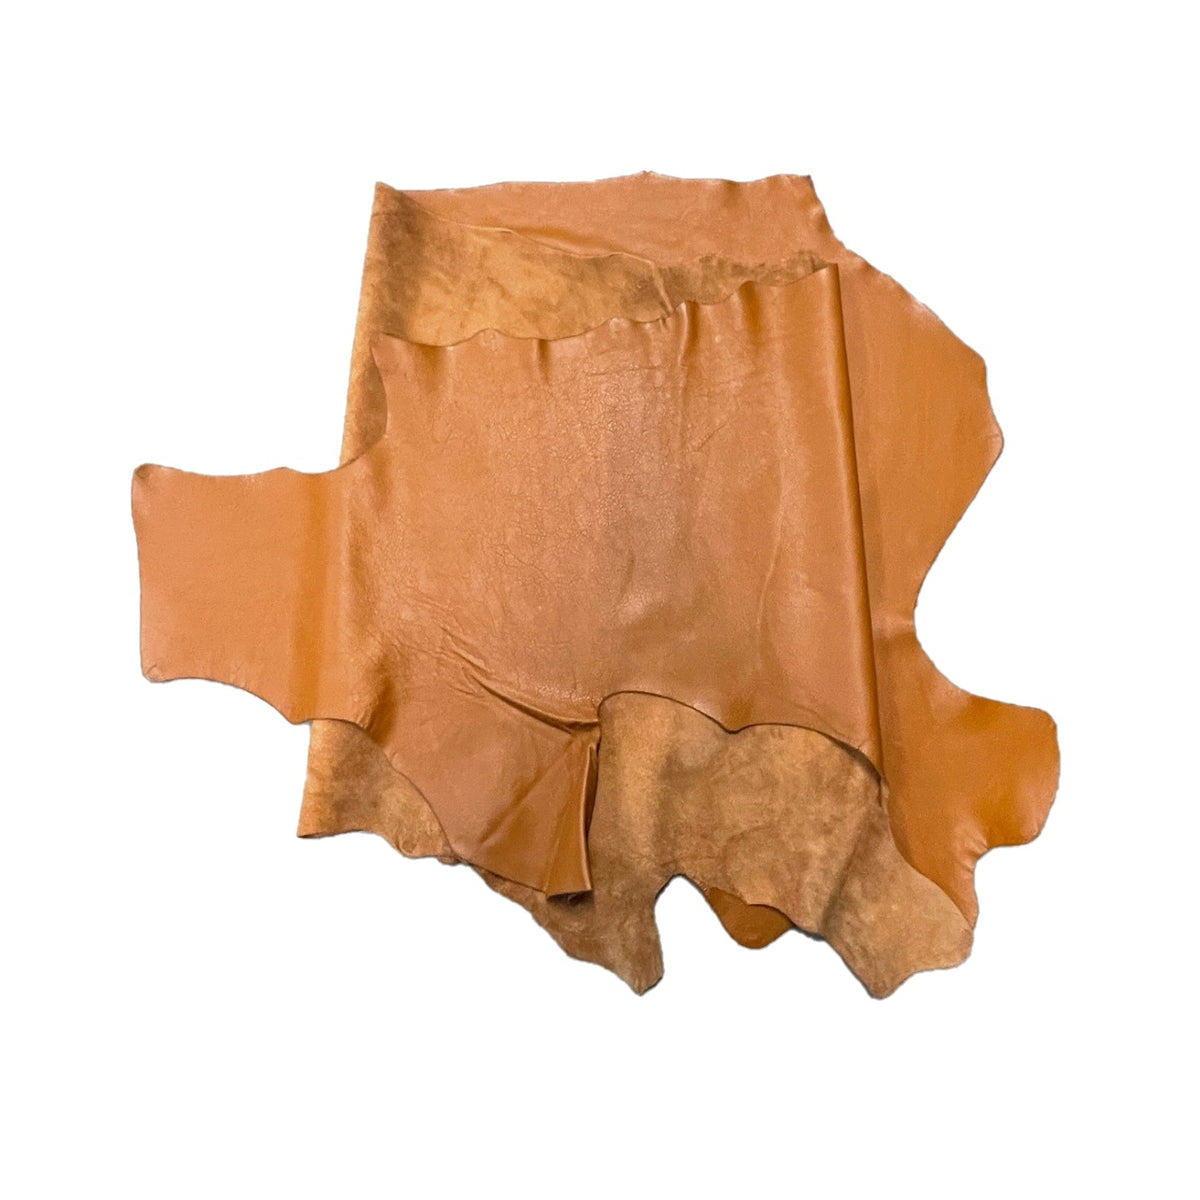 Whisky Nappa Cow Side | 1.4 - 1.6mm | 23 sq.ft | From $220 ea.